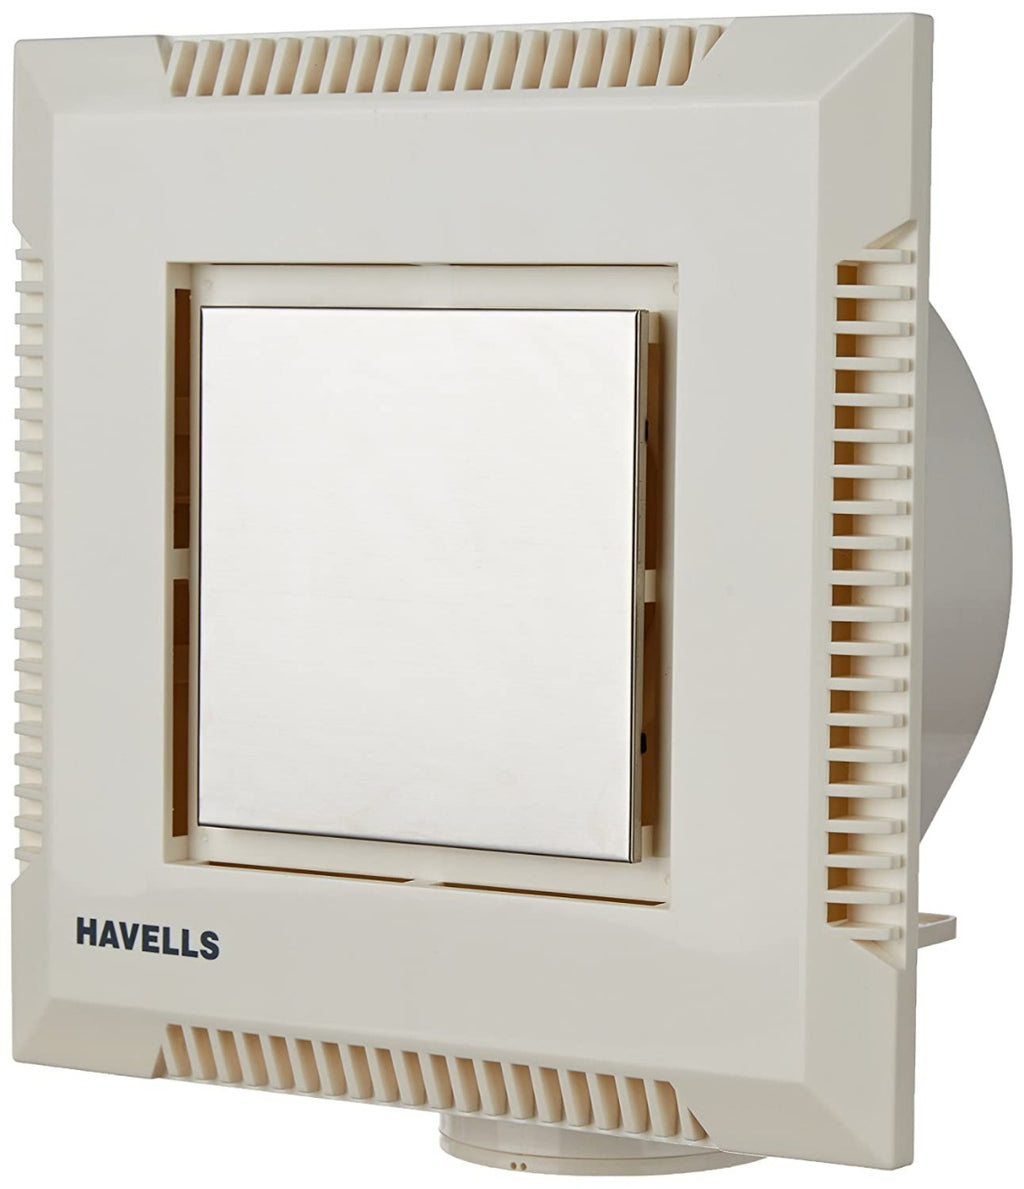 Havells Ventil Air DXC 130mm Roof Mounting Exaust Fan (White)